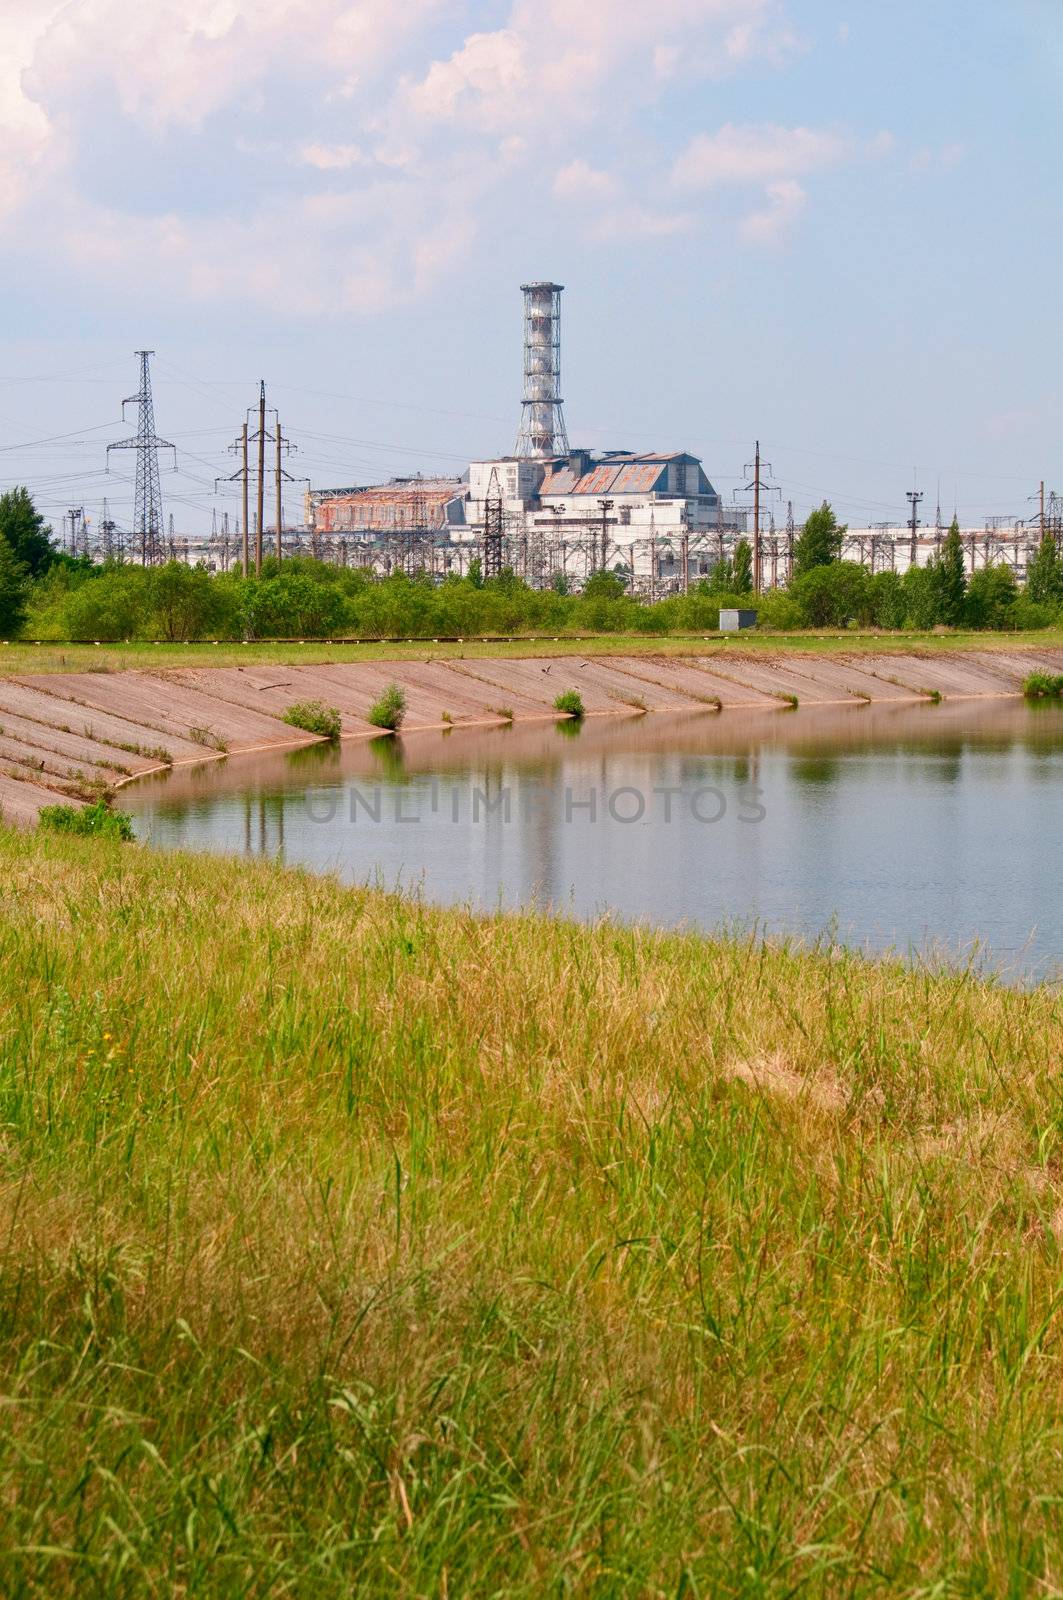 Chernobyl atomic nuclear power station in Ukraine